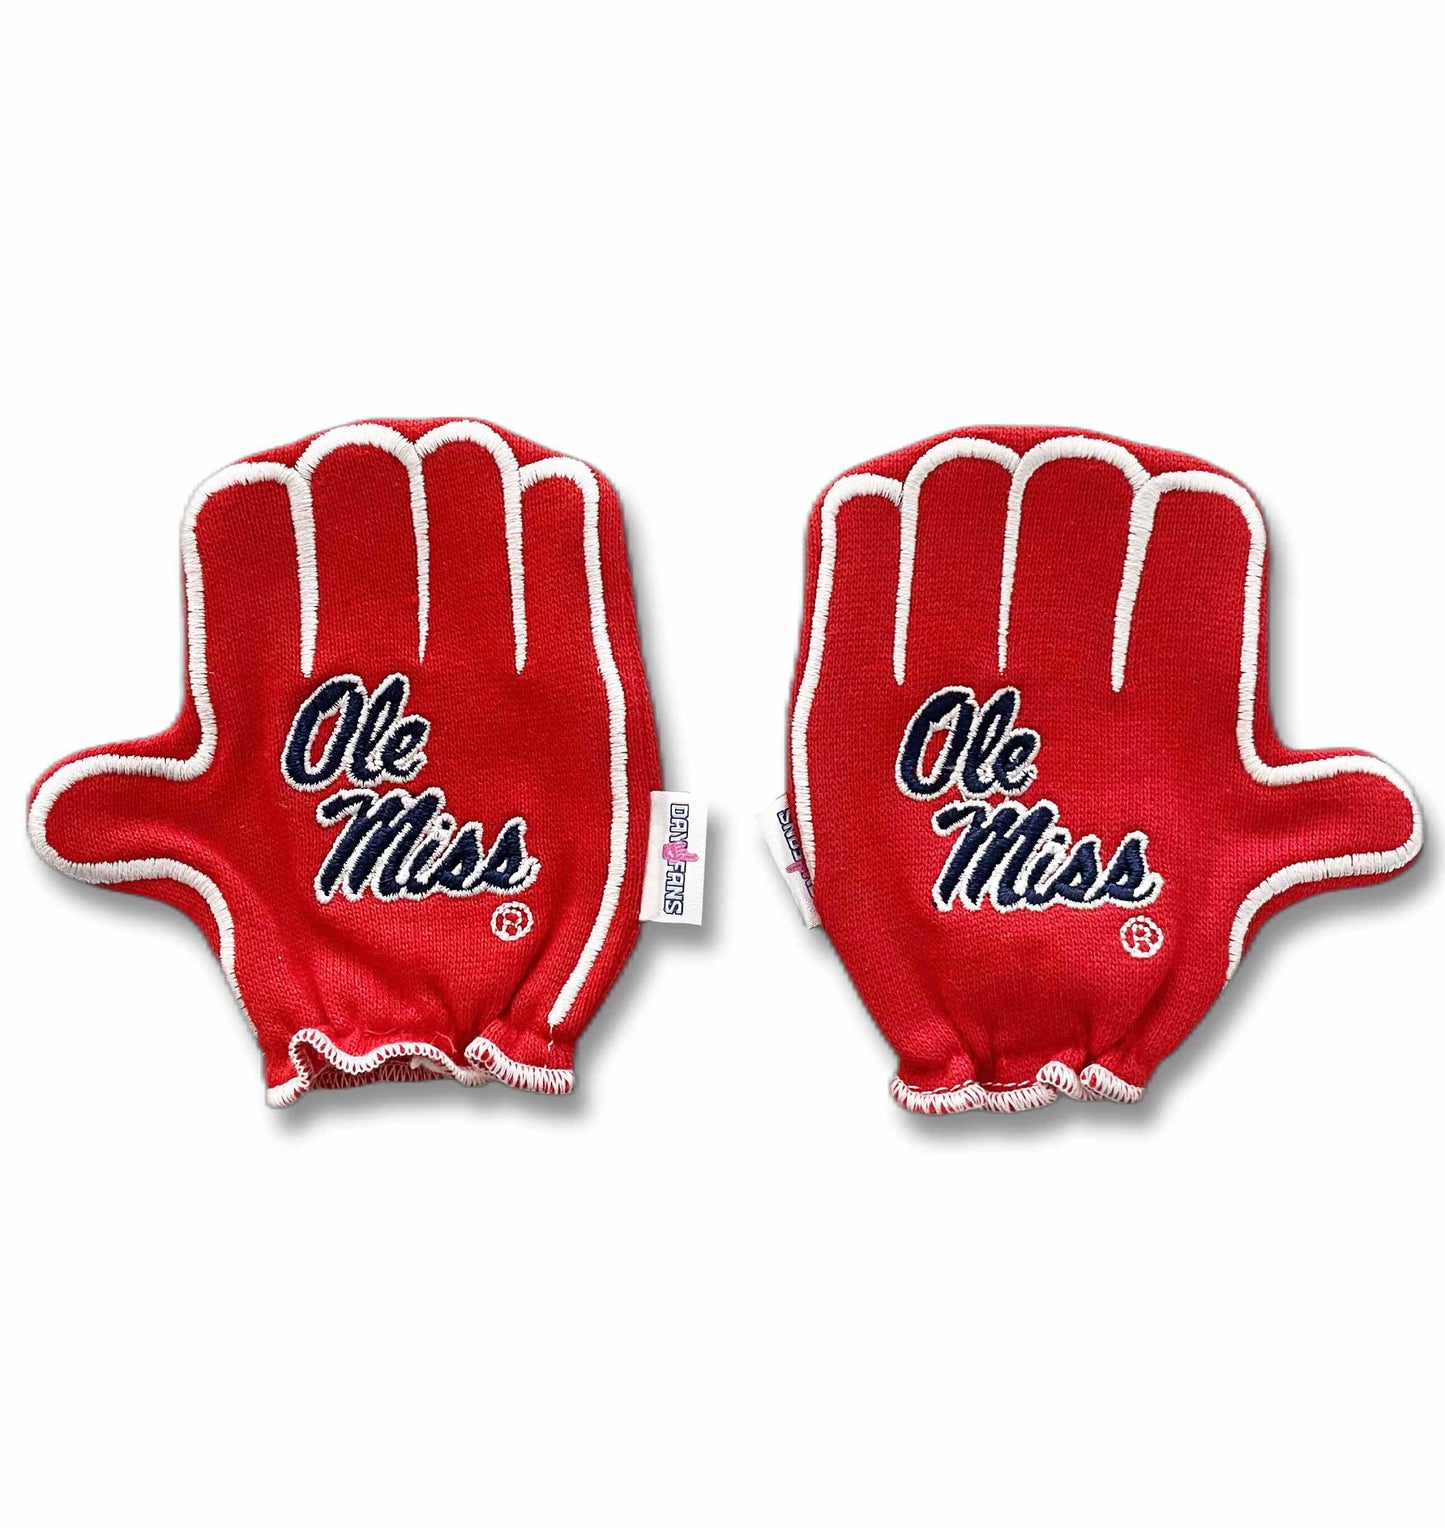 Ole Miss Fins Up FanMitts Baby Mittens Red Front Pair